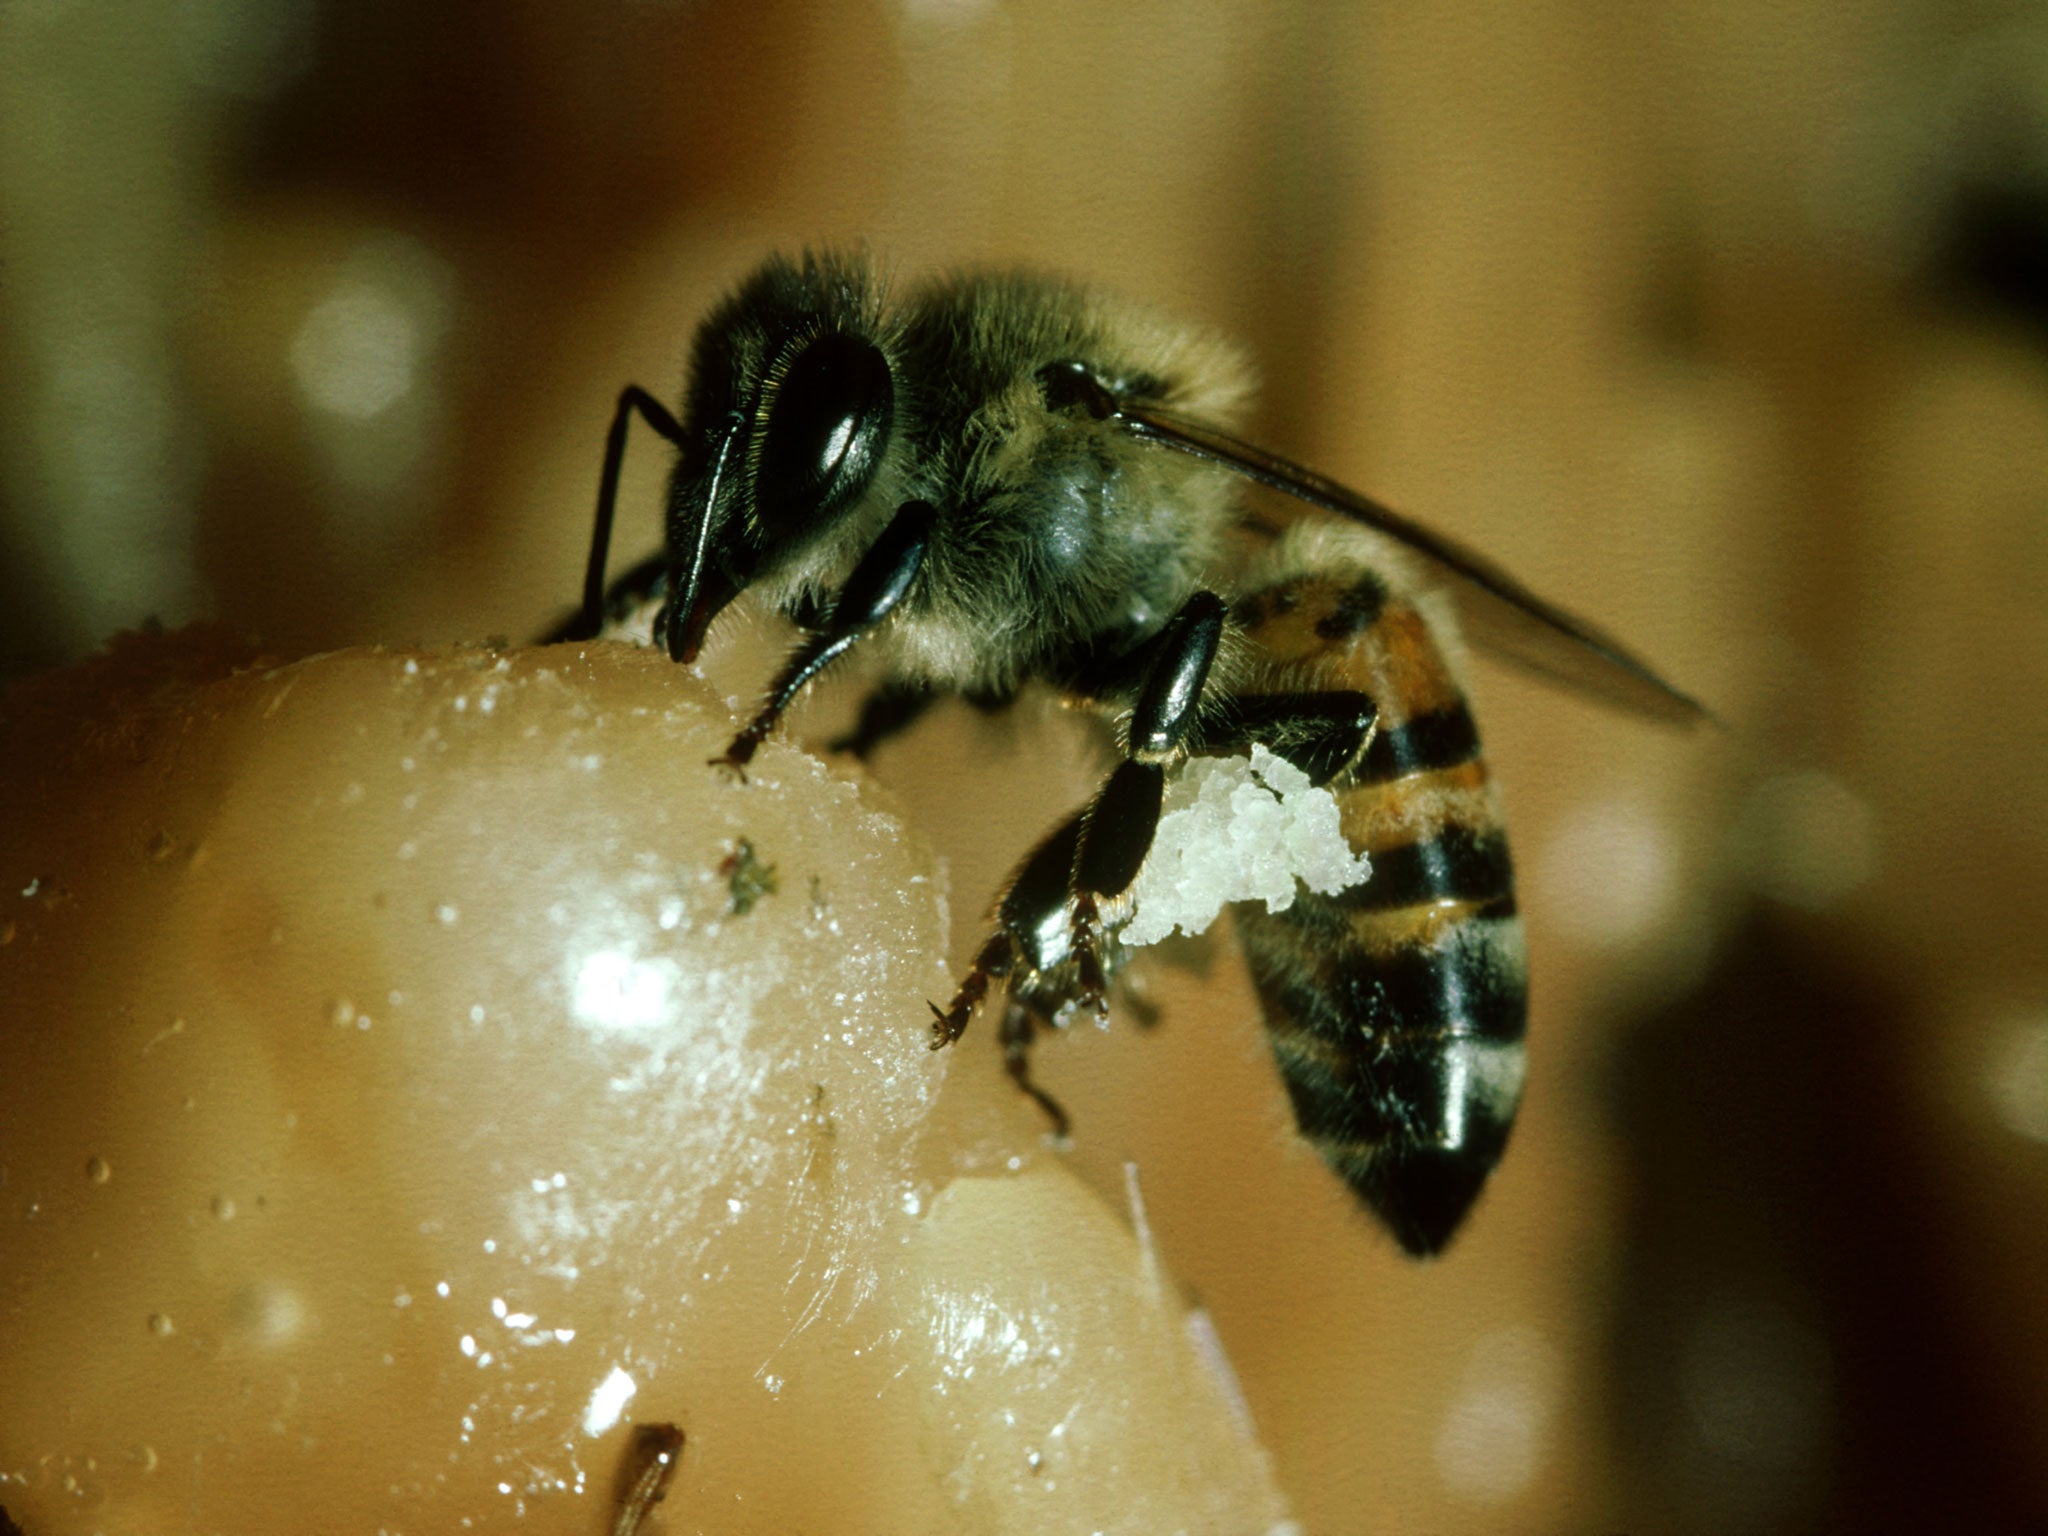 Africanized honey bees are more aggressive than other bees